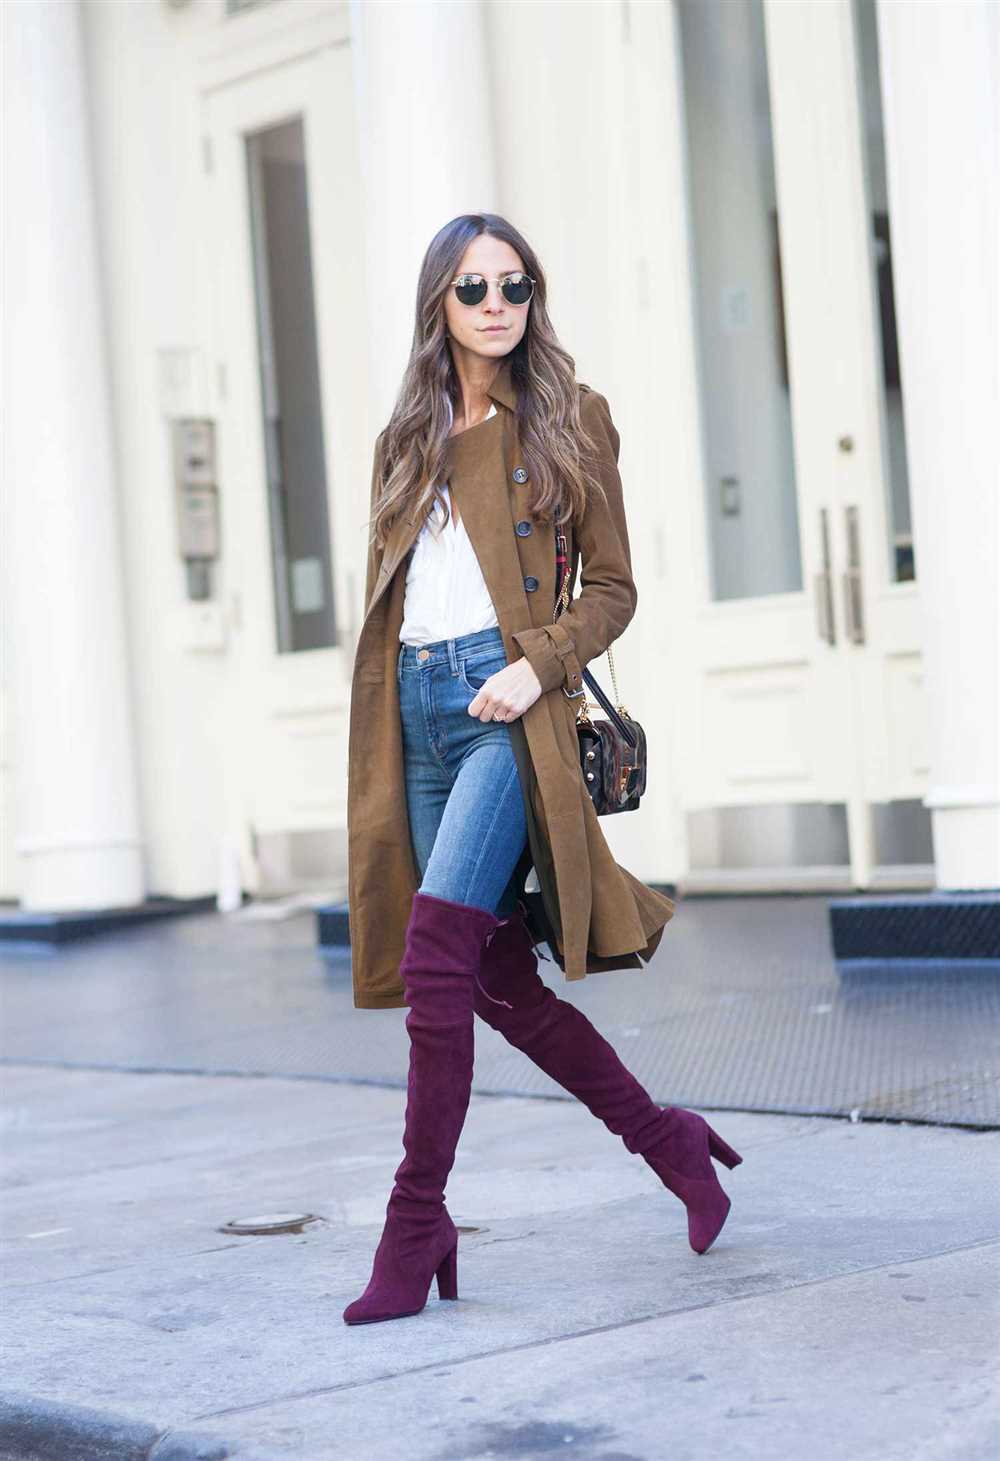 Creating a casual look with thigh high boots and ripped jeans